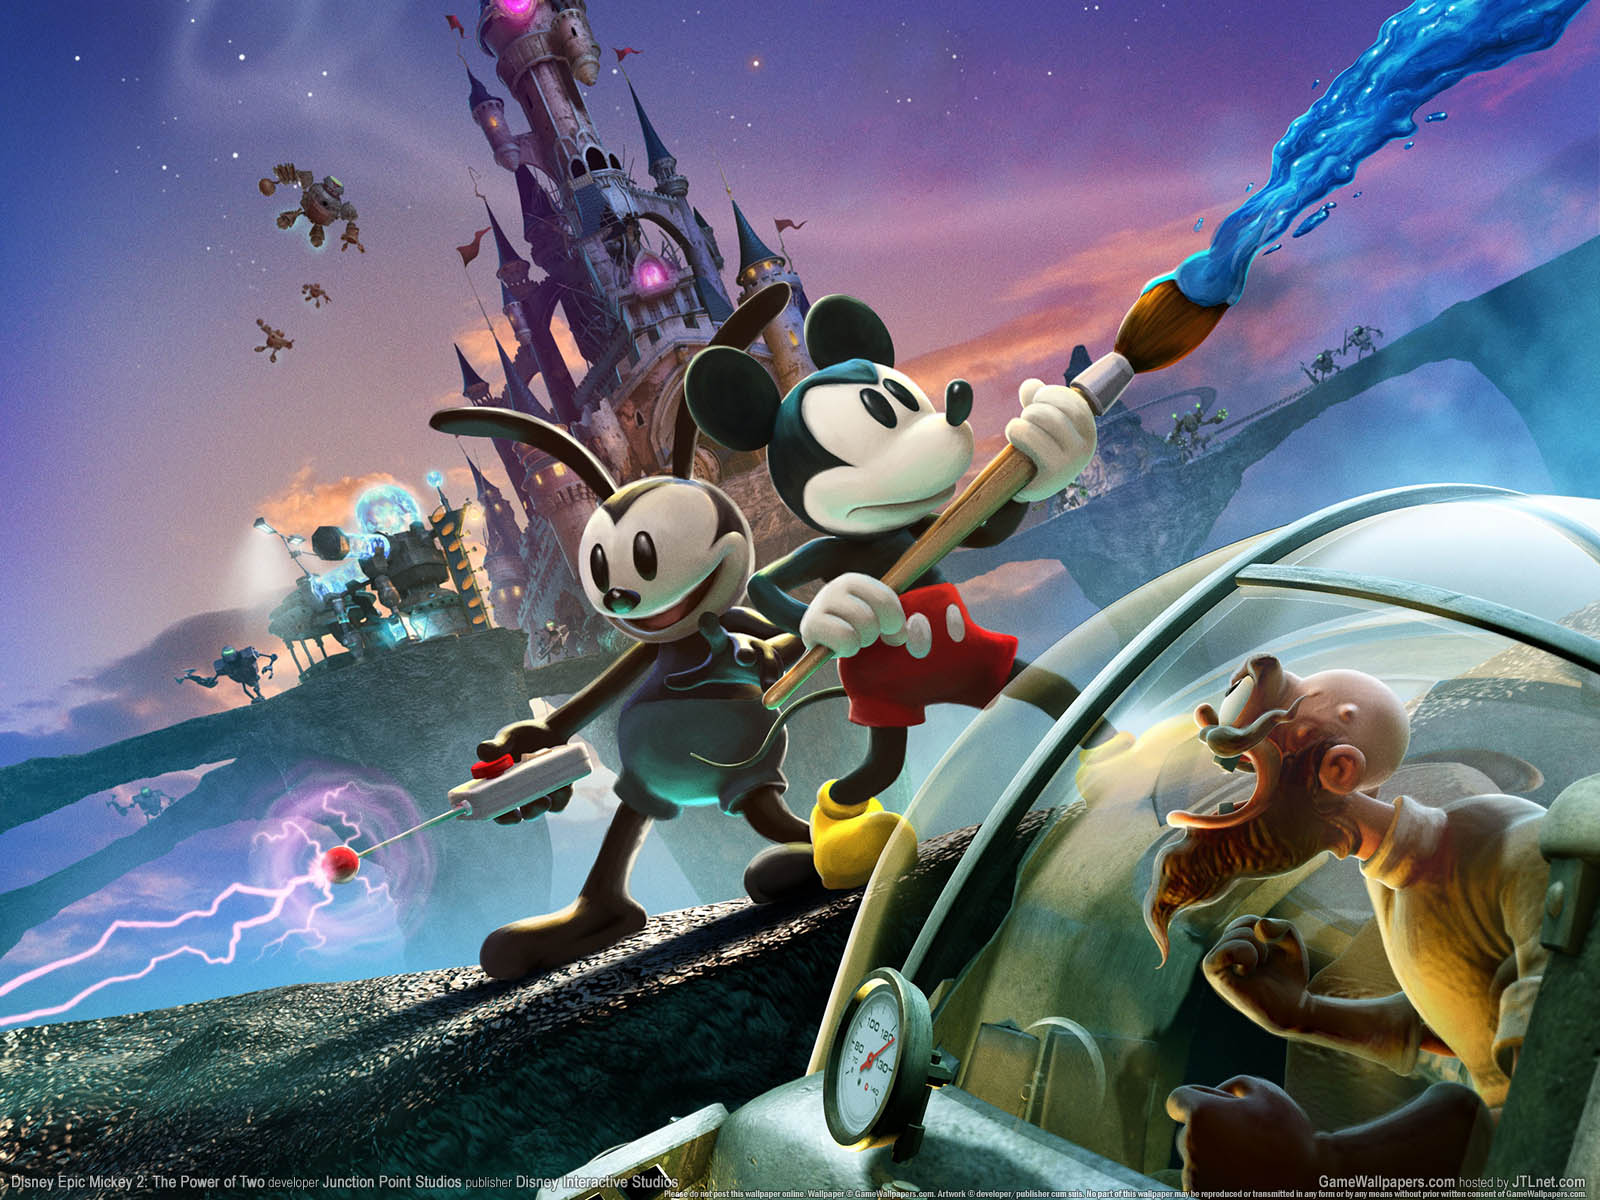 Disney Epic Mickey 2%3A The Power of Two achtergrond 01 1600x1200